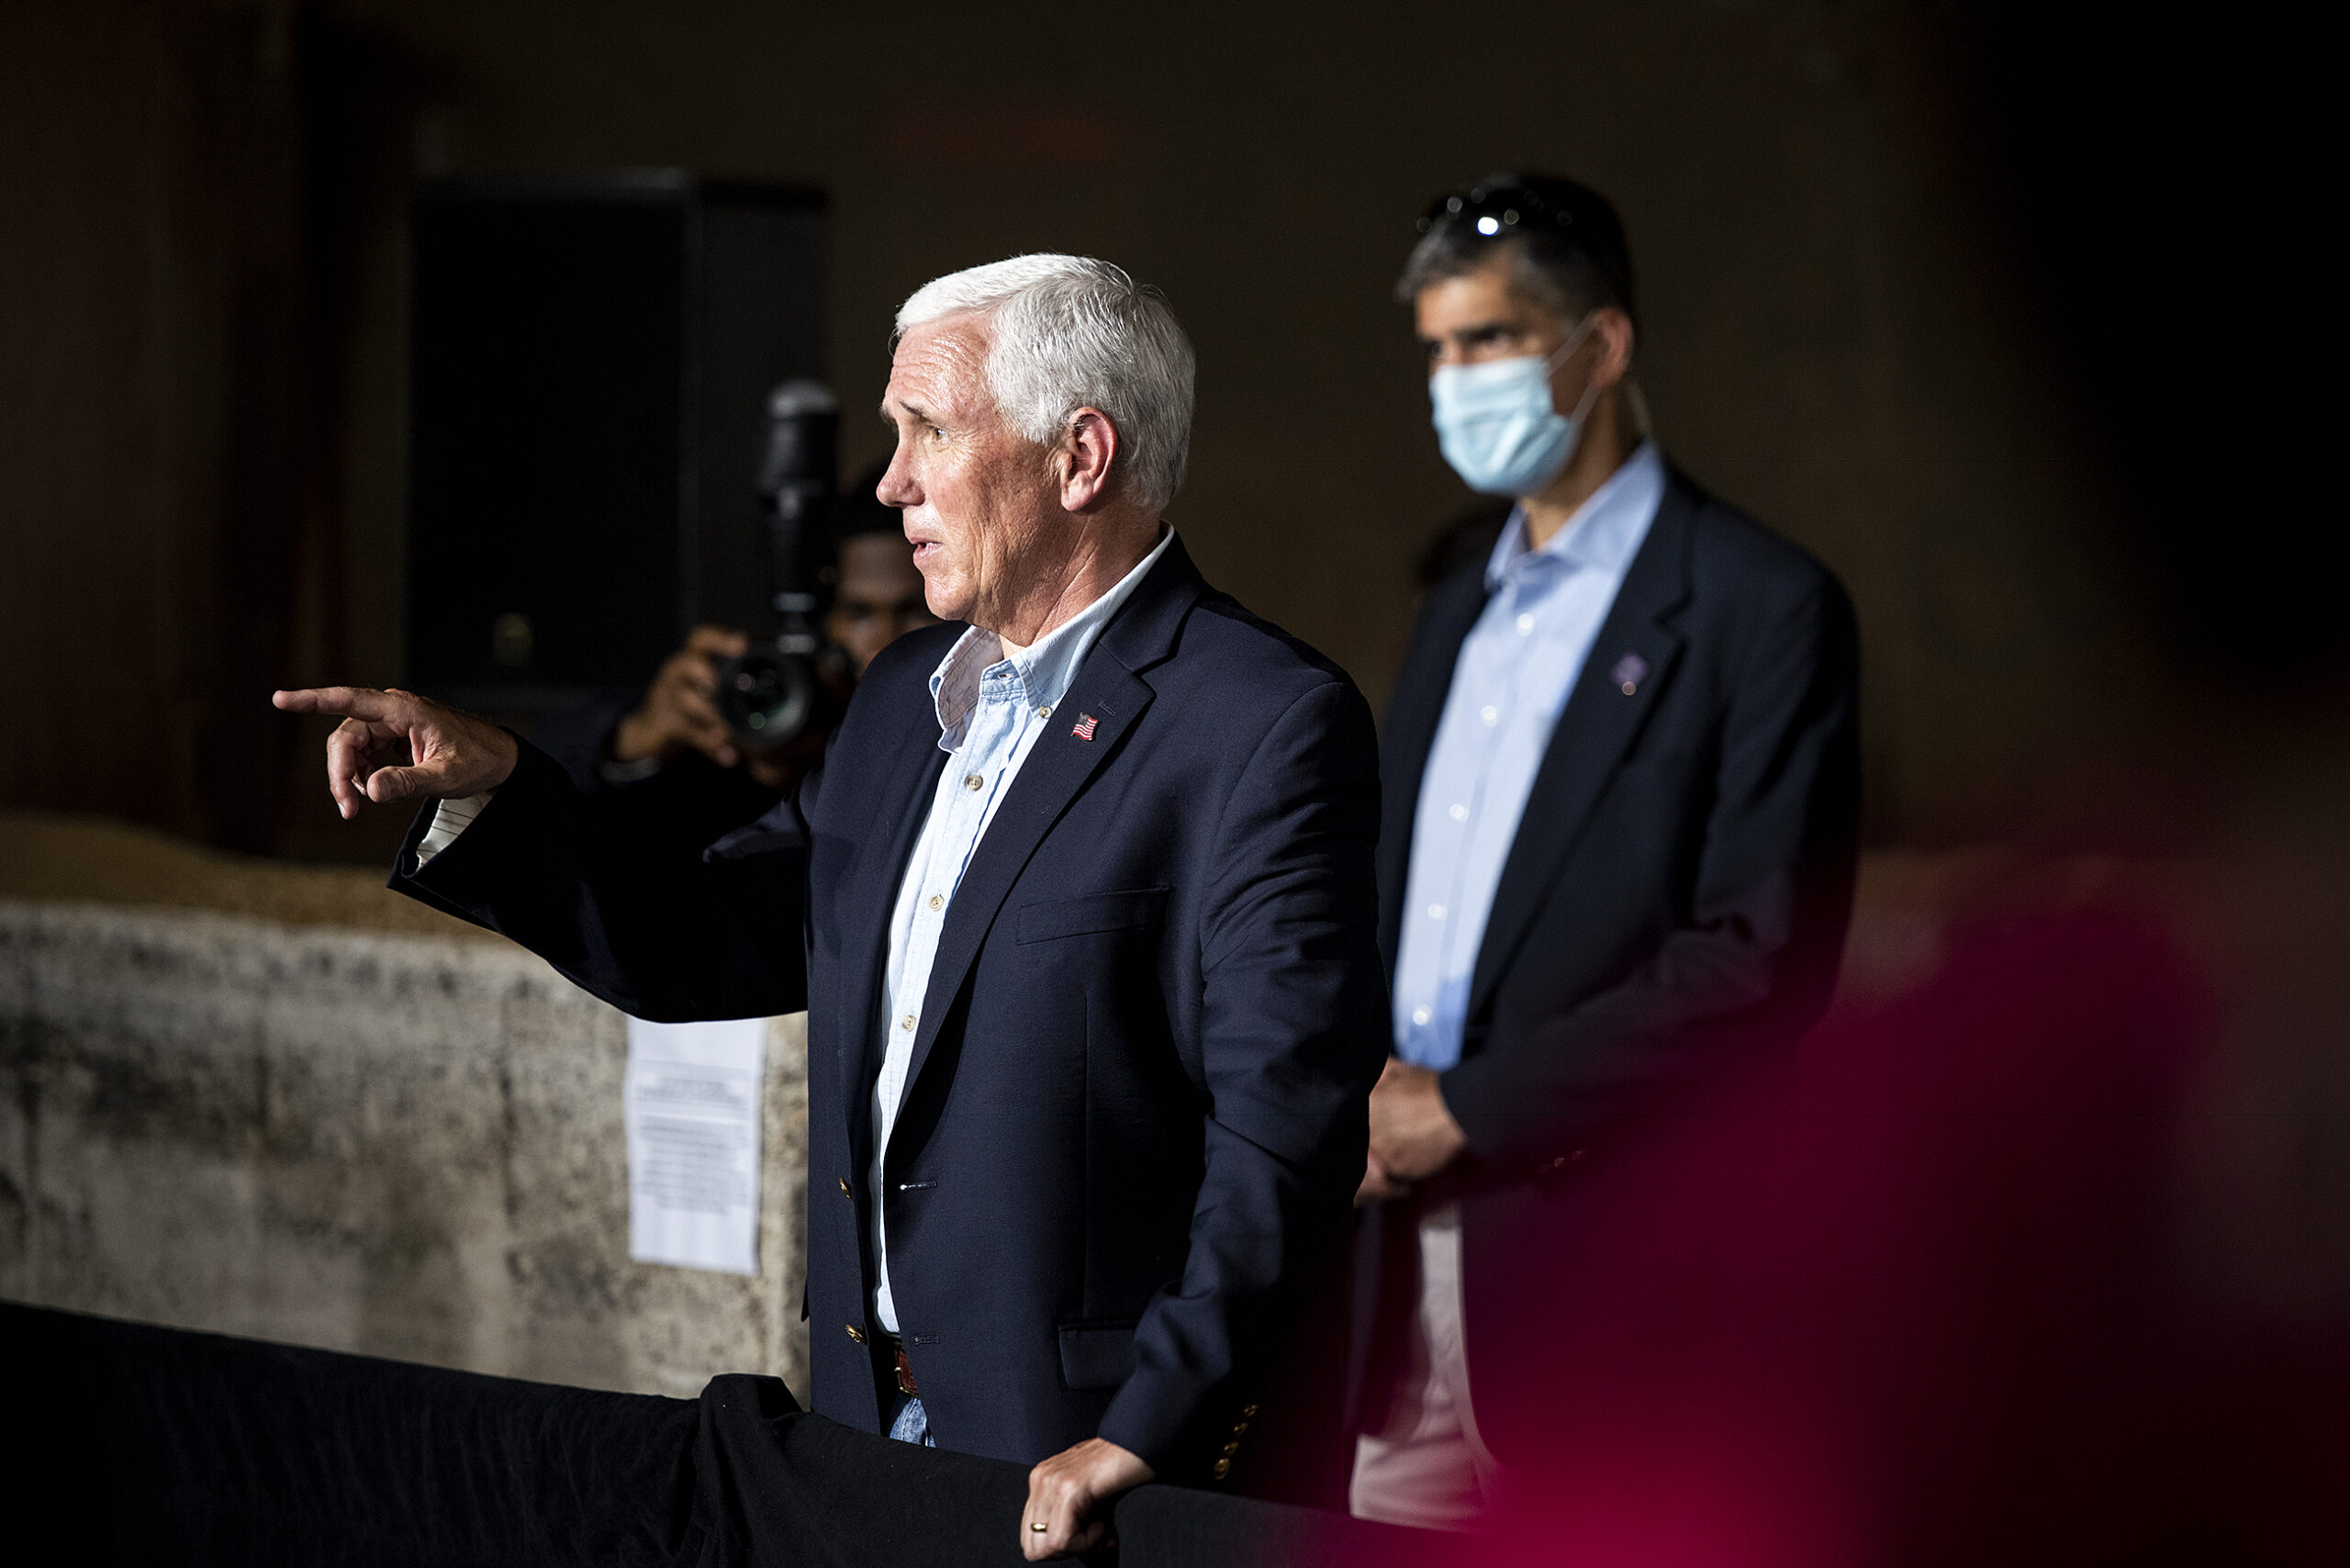 At Eau Claire Rally, Pence Confirms Trump Will Nominate Ginsburg Replacement Saturday